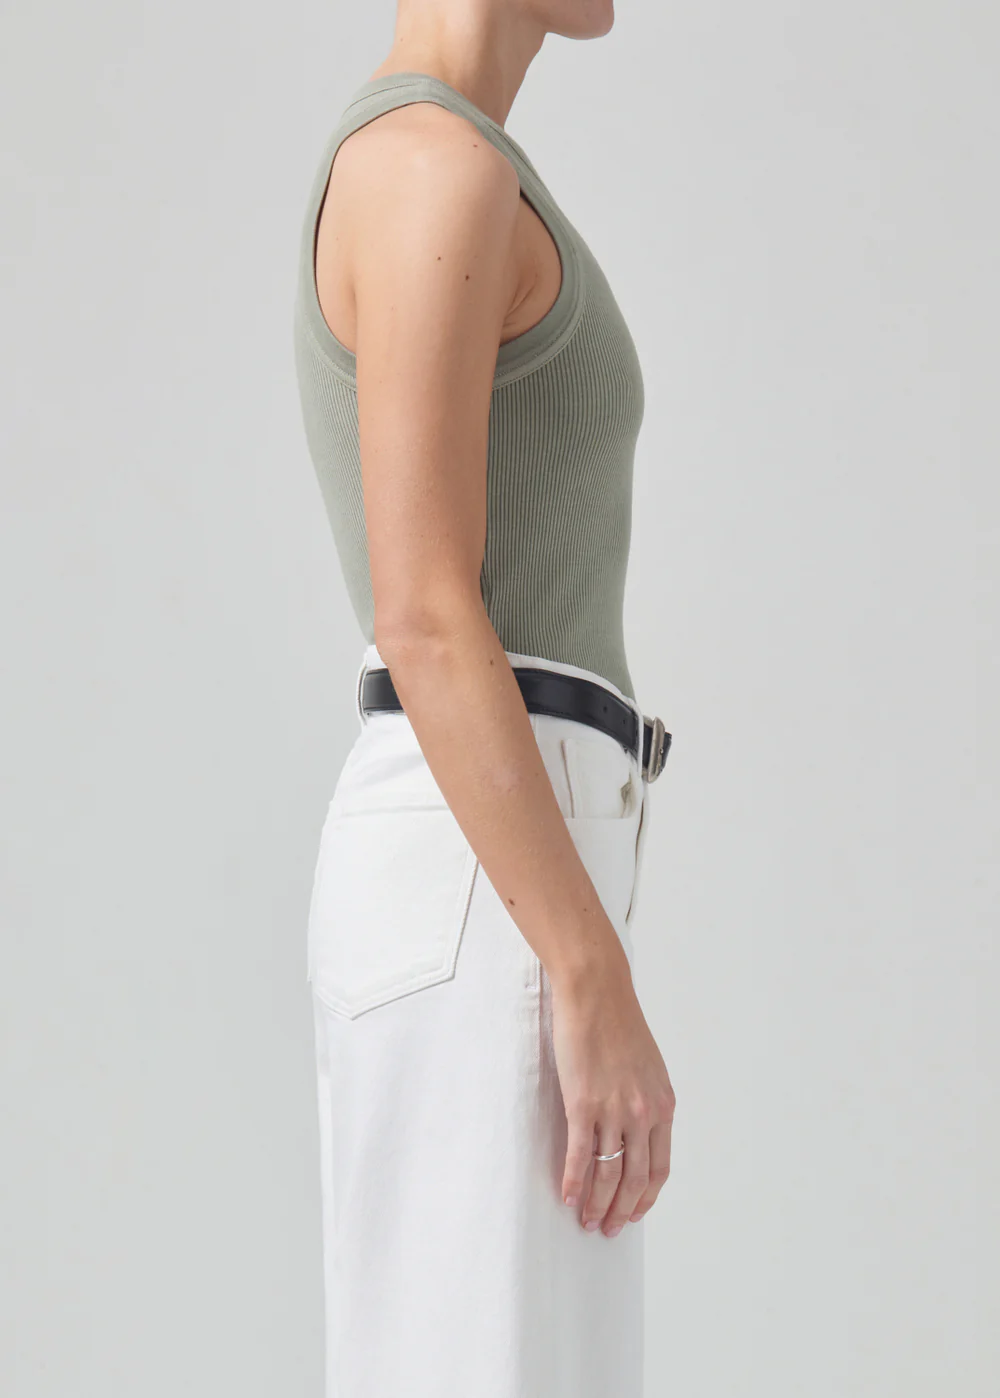 Isabel Rib Tank Top - Spring Moss - Citizens of Humanity Canada - Danali - 9201-3004_SPRMS